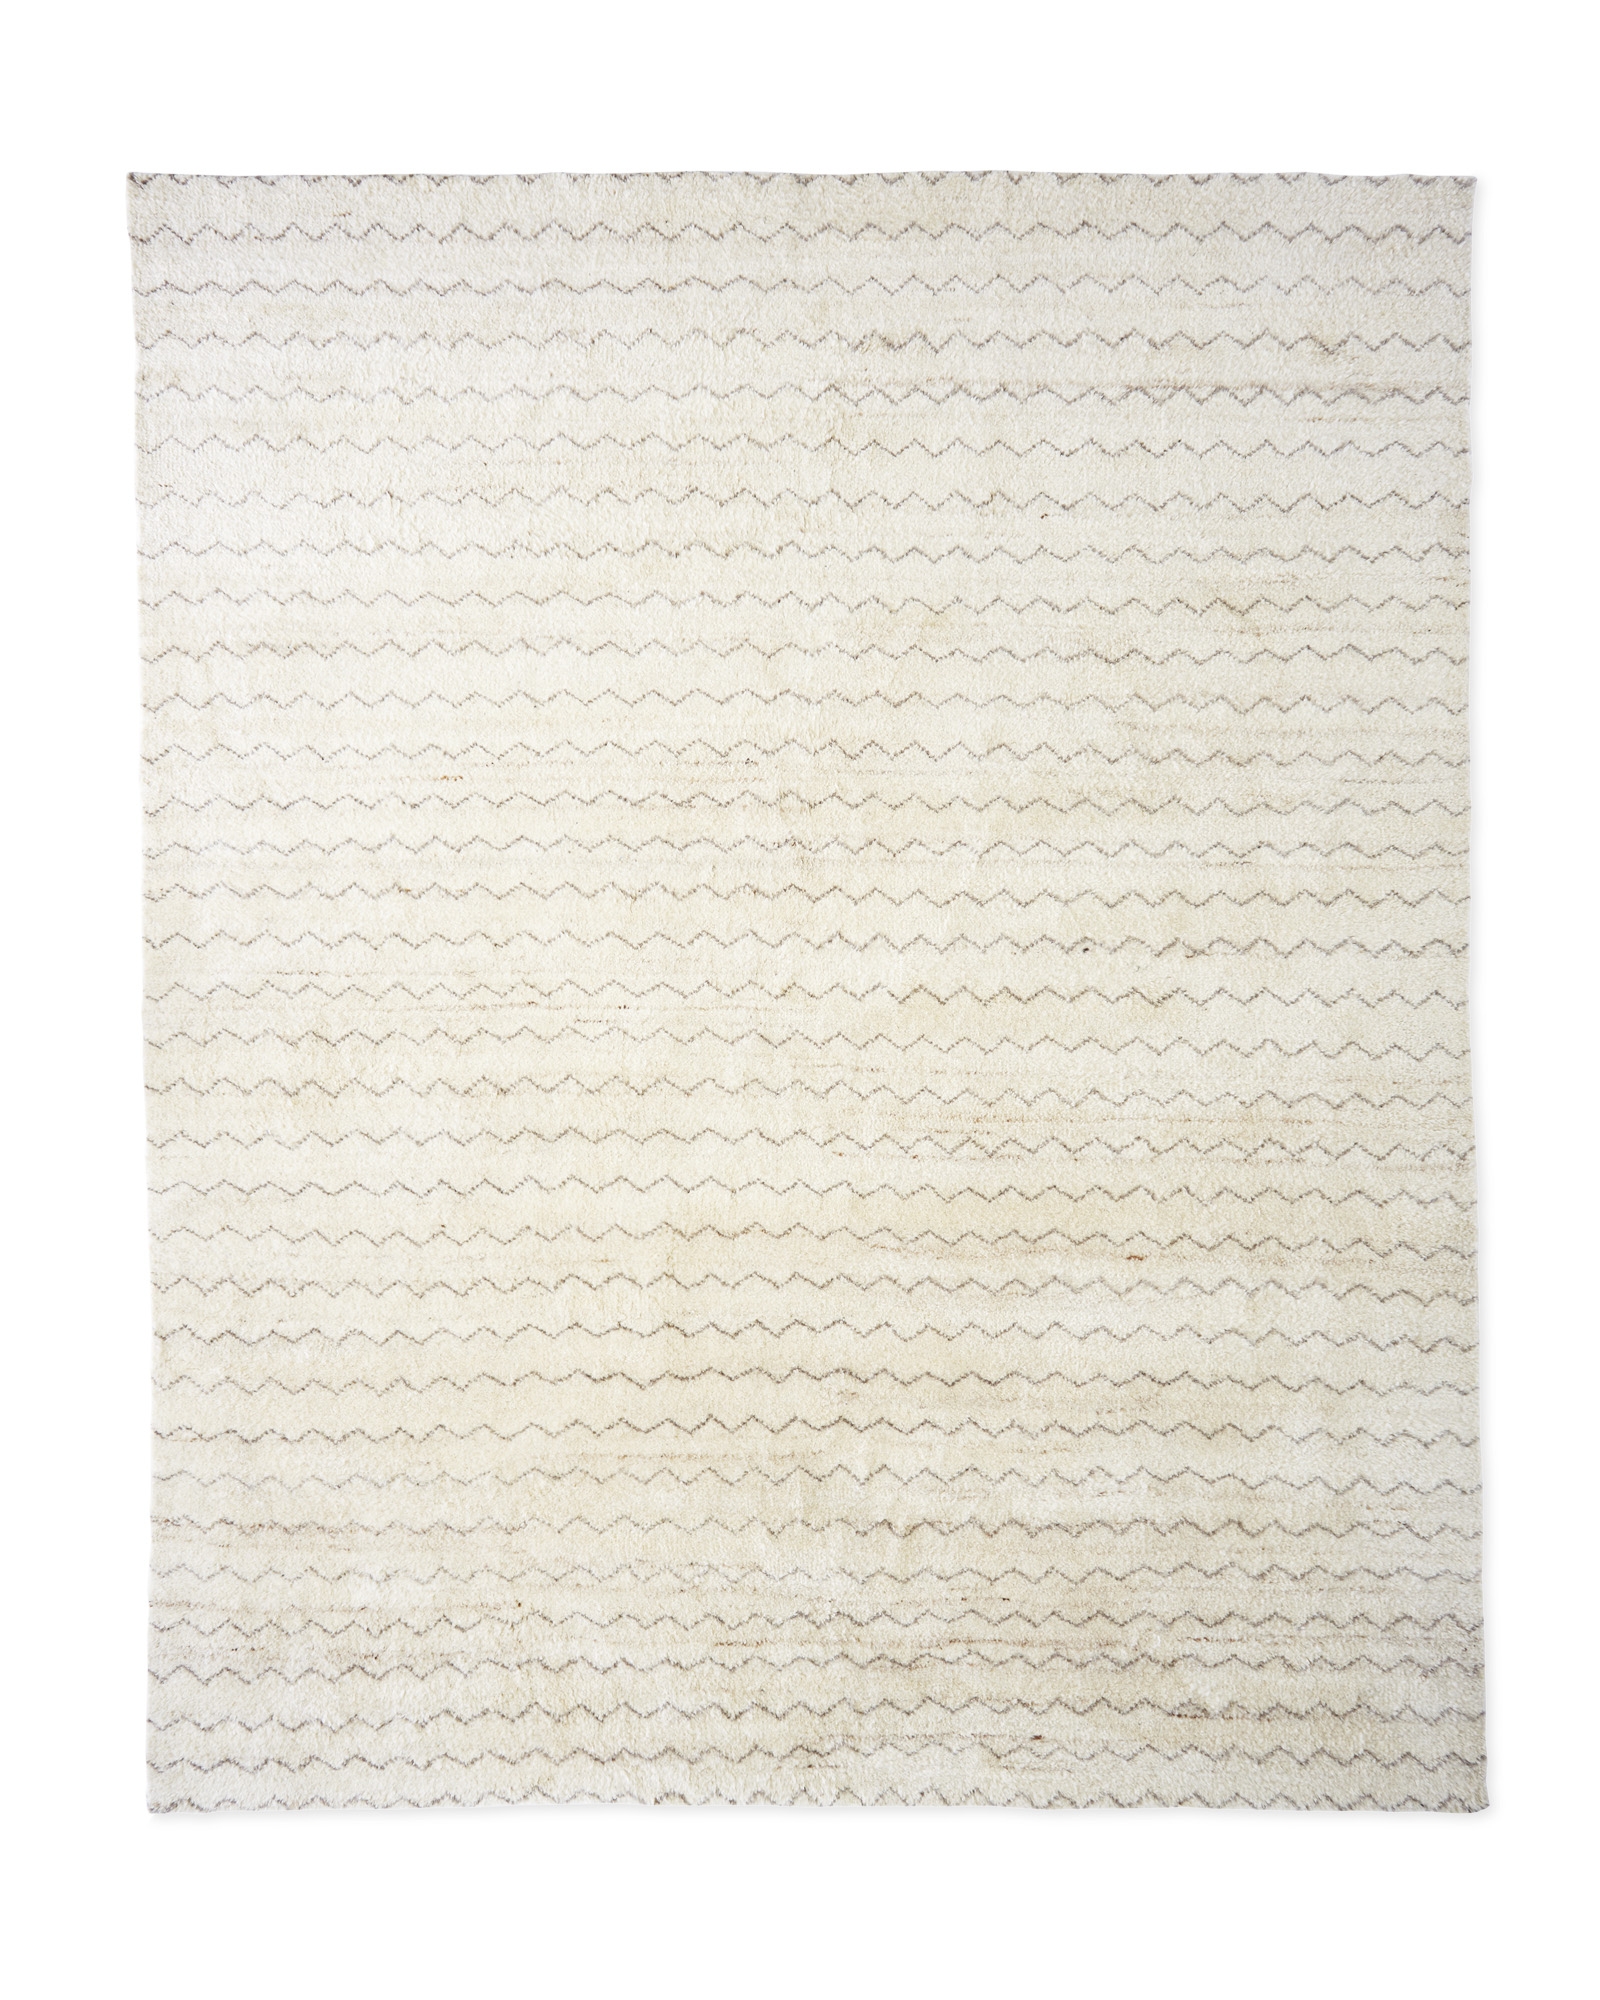 Palma Hand Knotted Rug - 8'x10' - Image 1